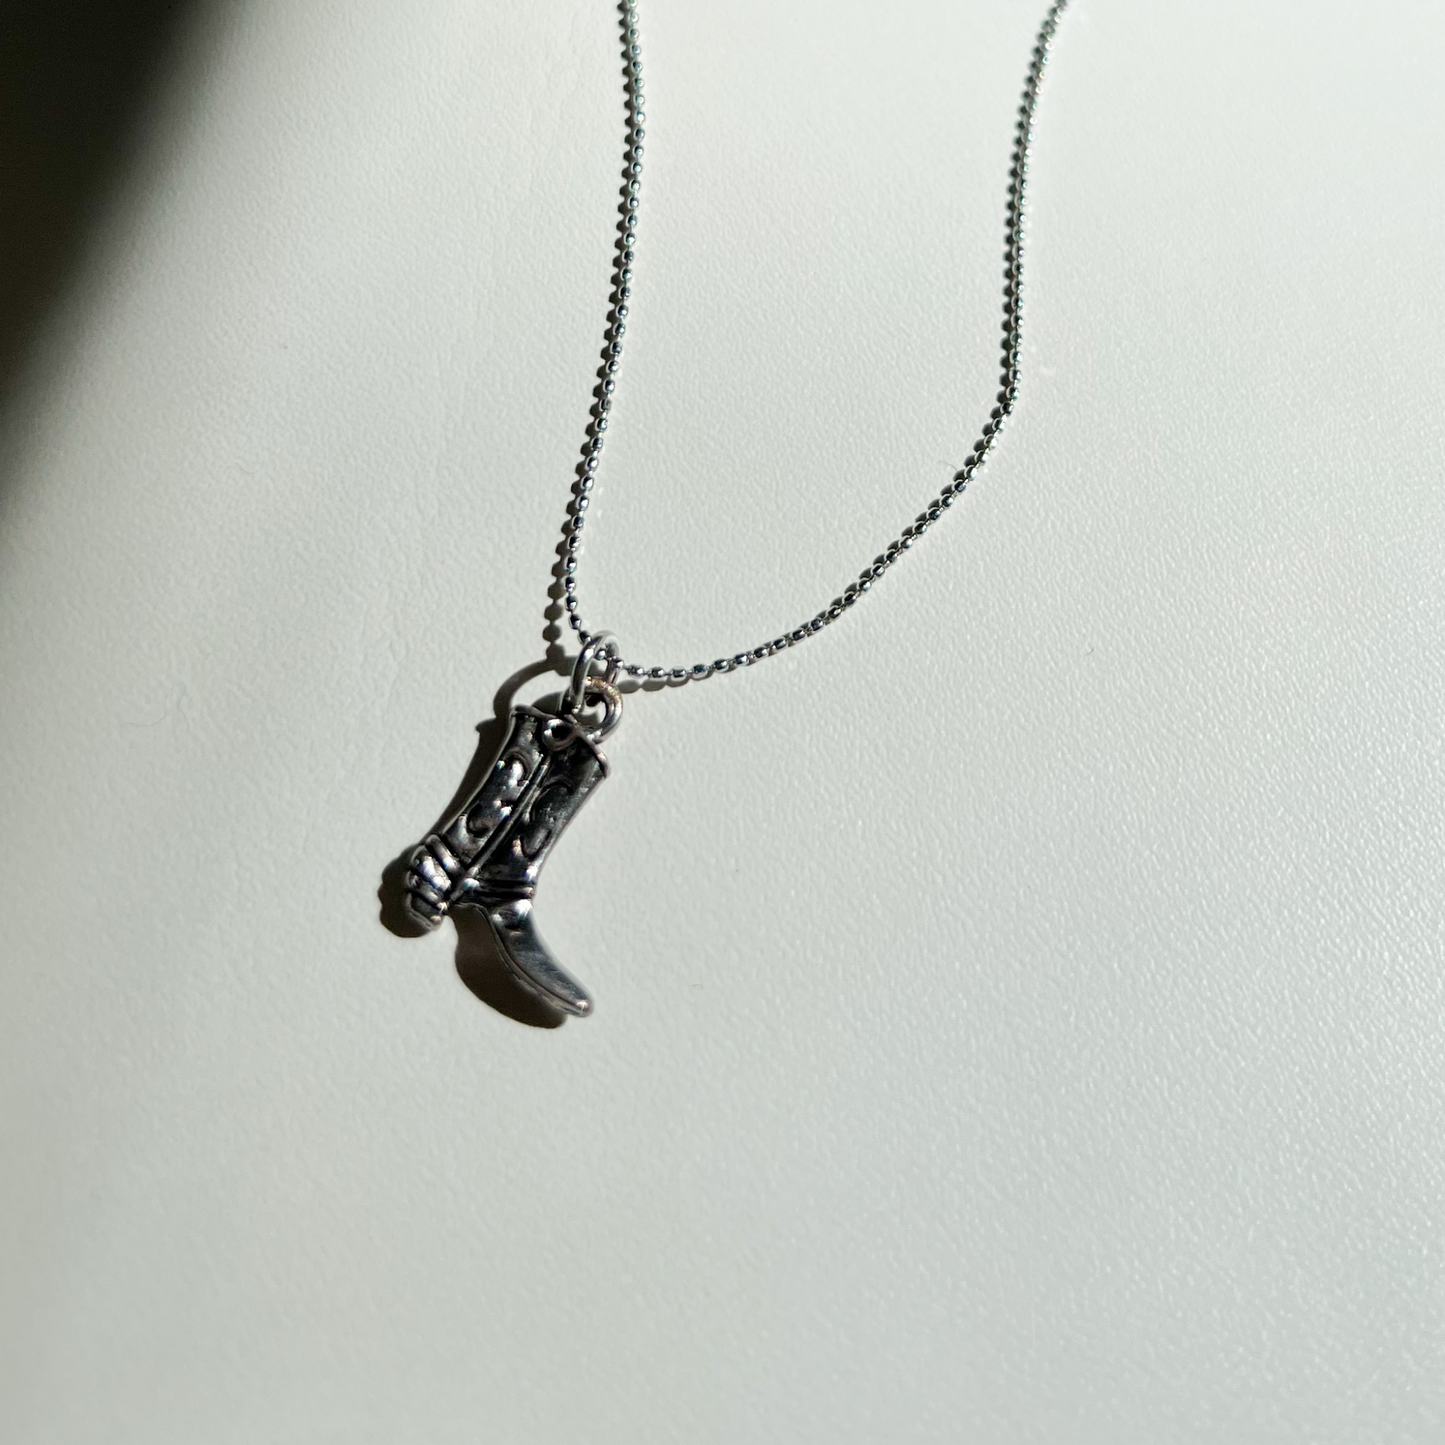 Roop Jewelry cowboy boot necklace. Sustainable and ethical jewelry in Oakland, ca.